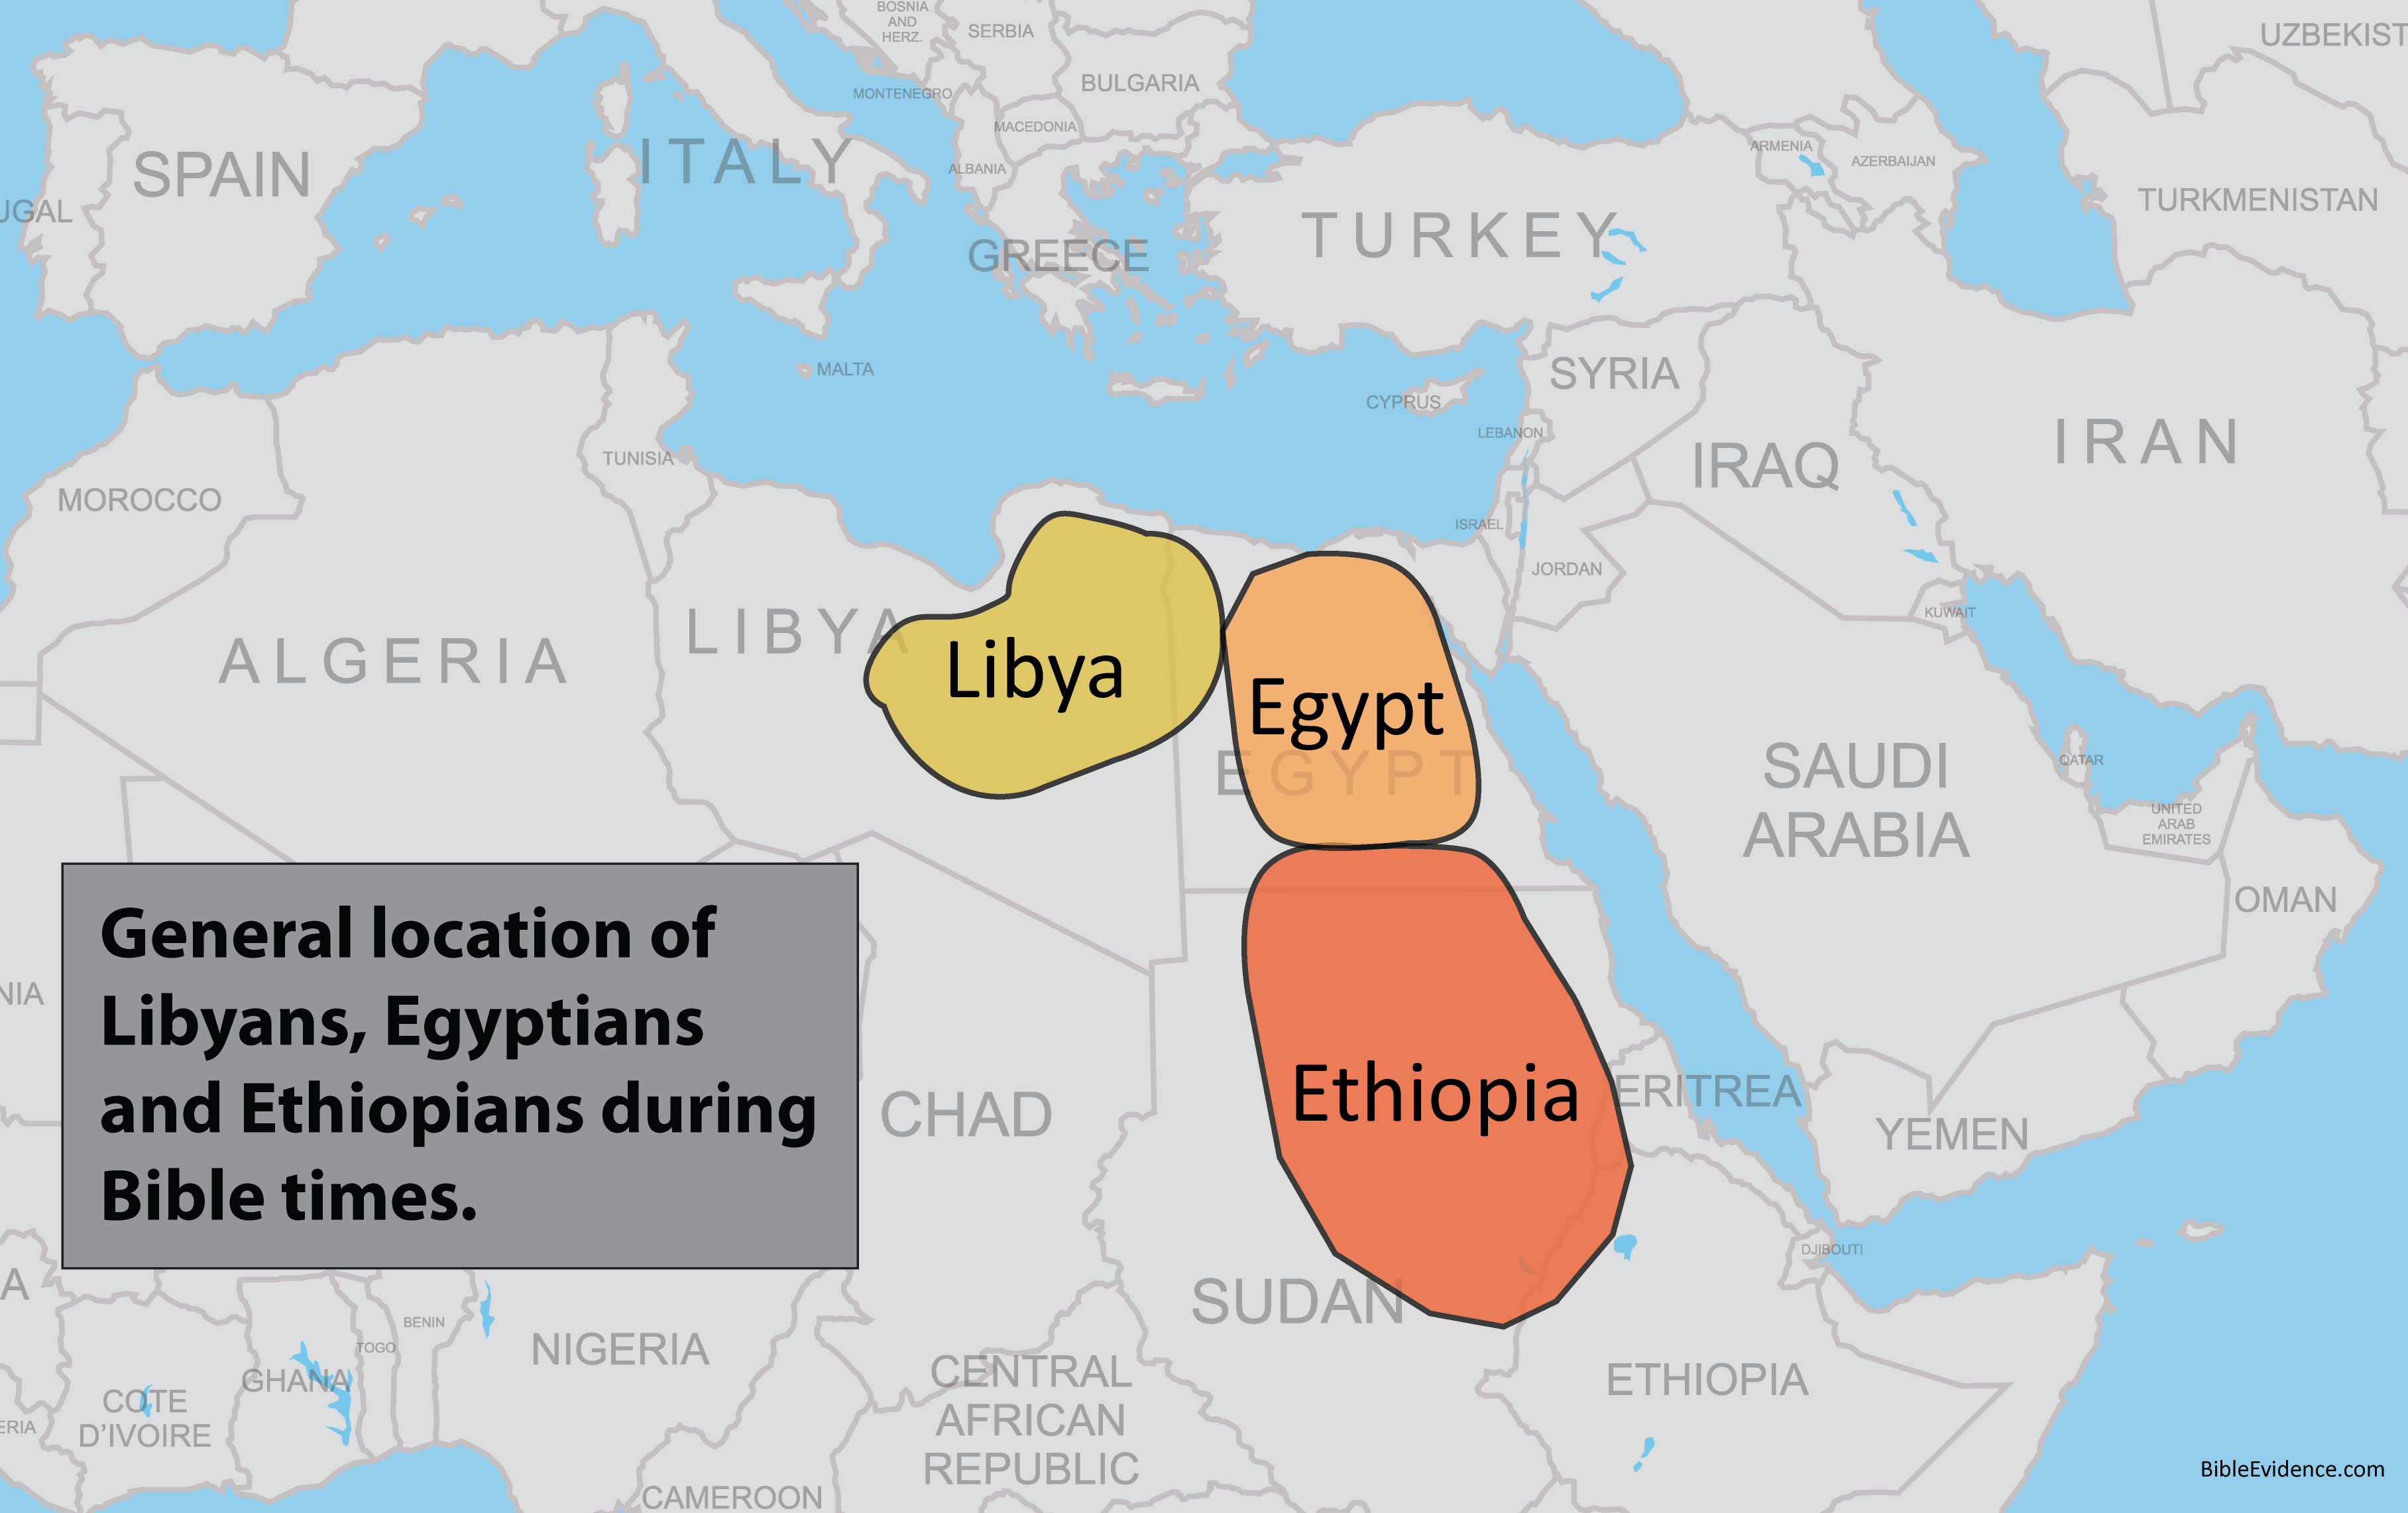 General location of Ethiopians, Egyptians and Libyans in Bible Times